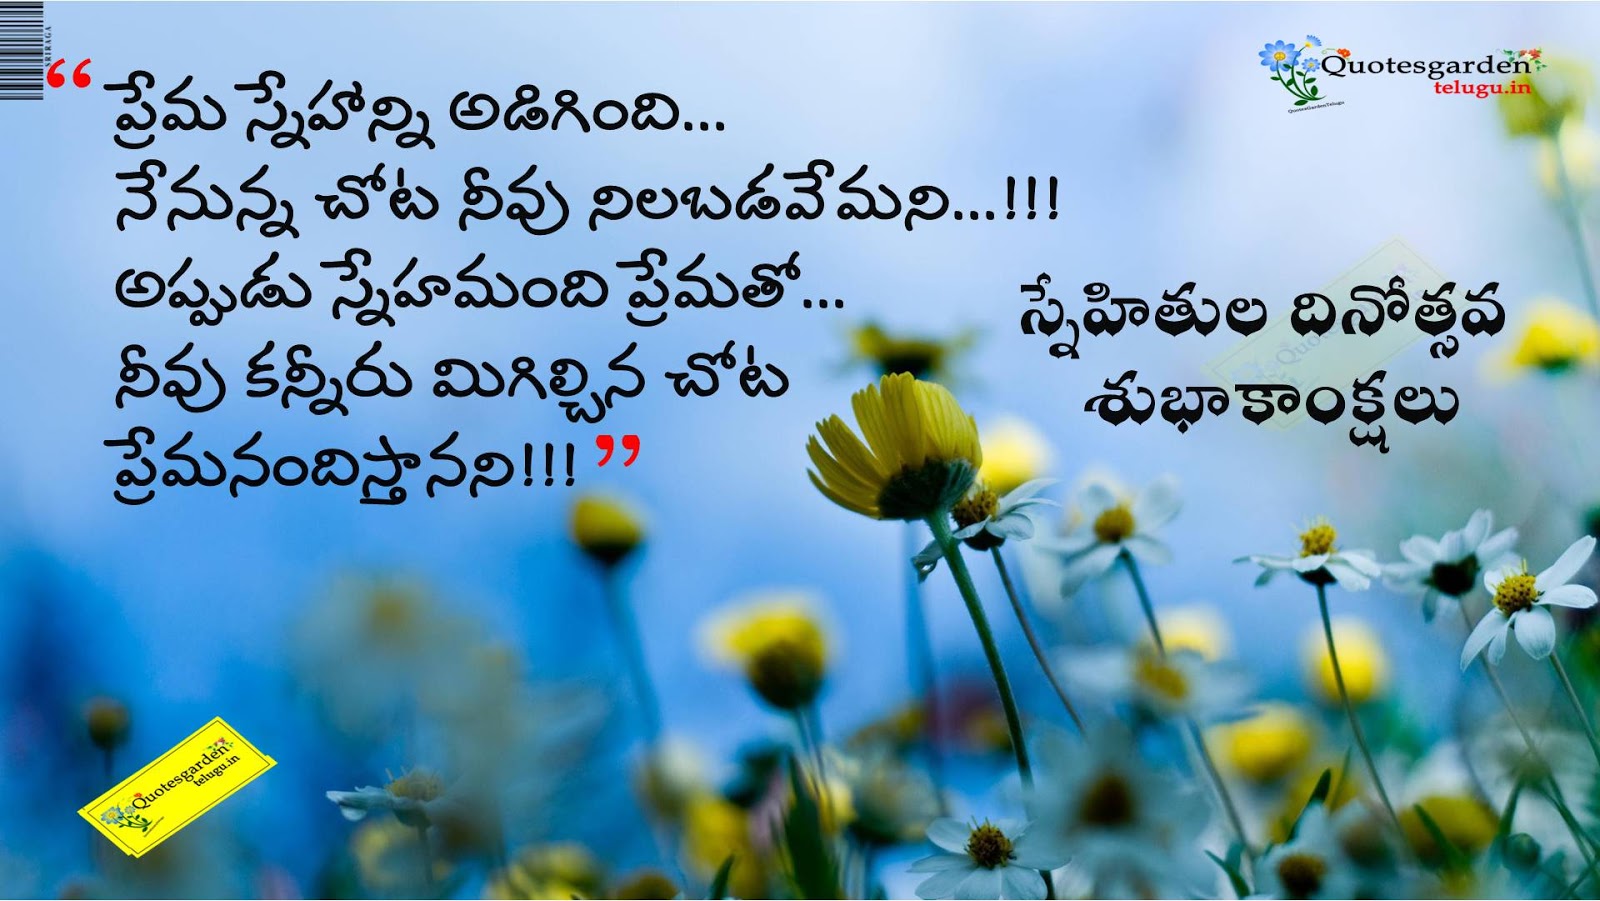 Latest Friendship day quotes in telugu with hd wallpapers | QUOTES ...